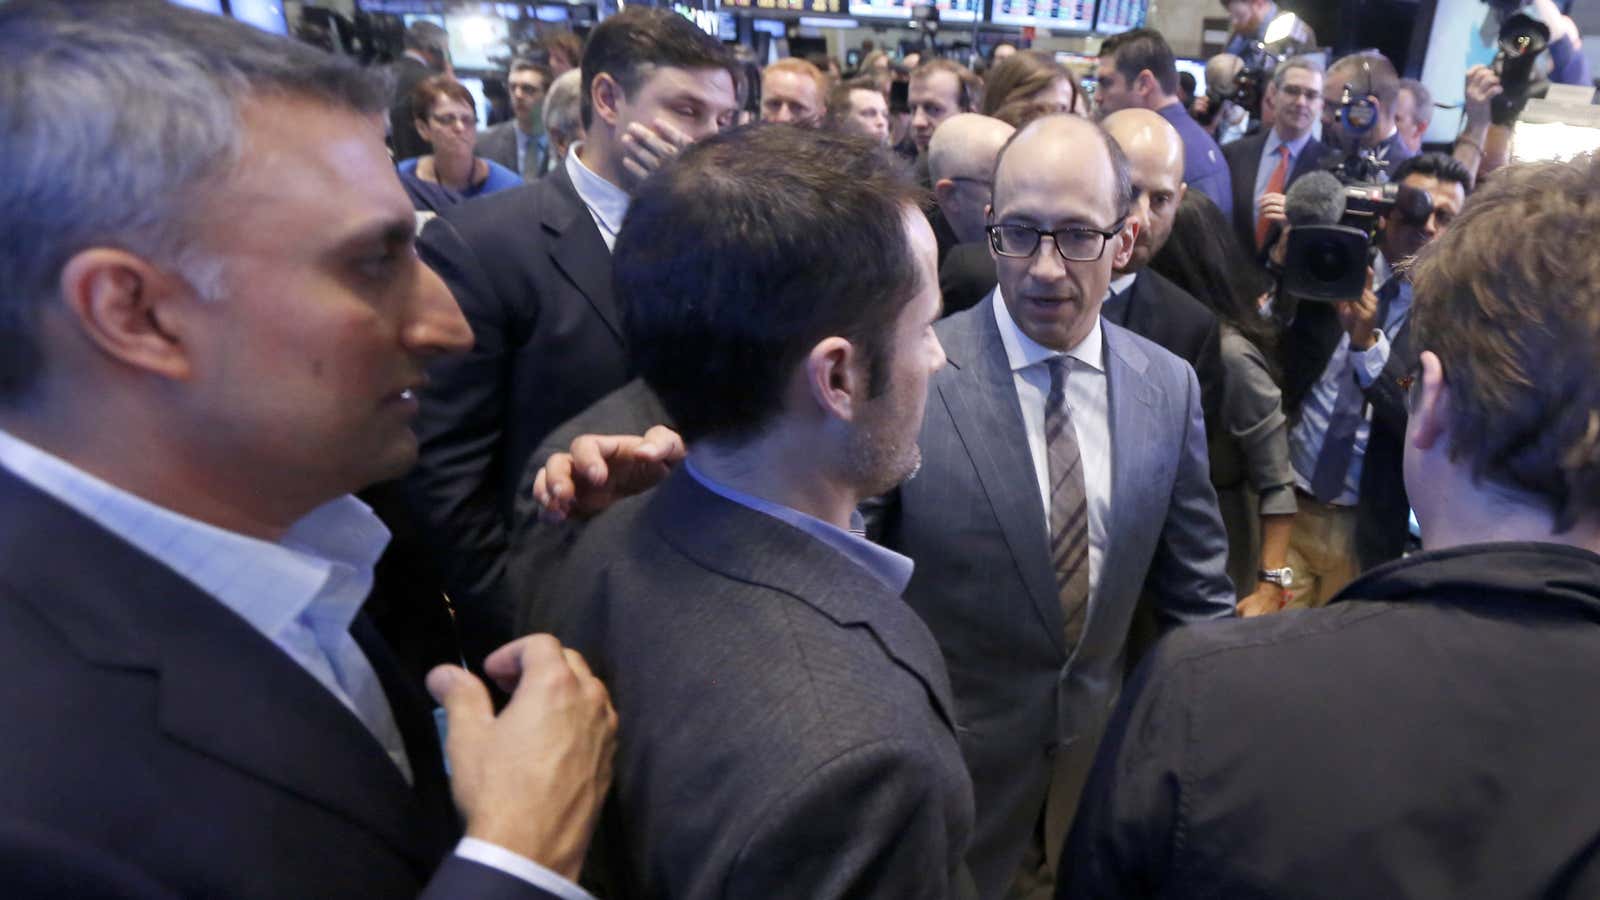 Dick Costolo lapping it up on the floor of the NYSE.